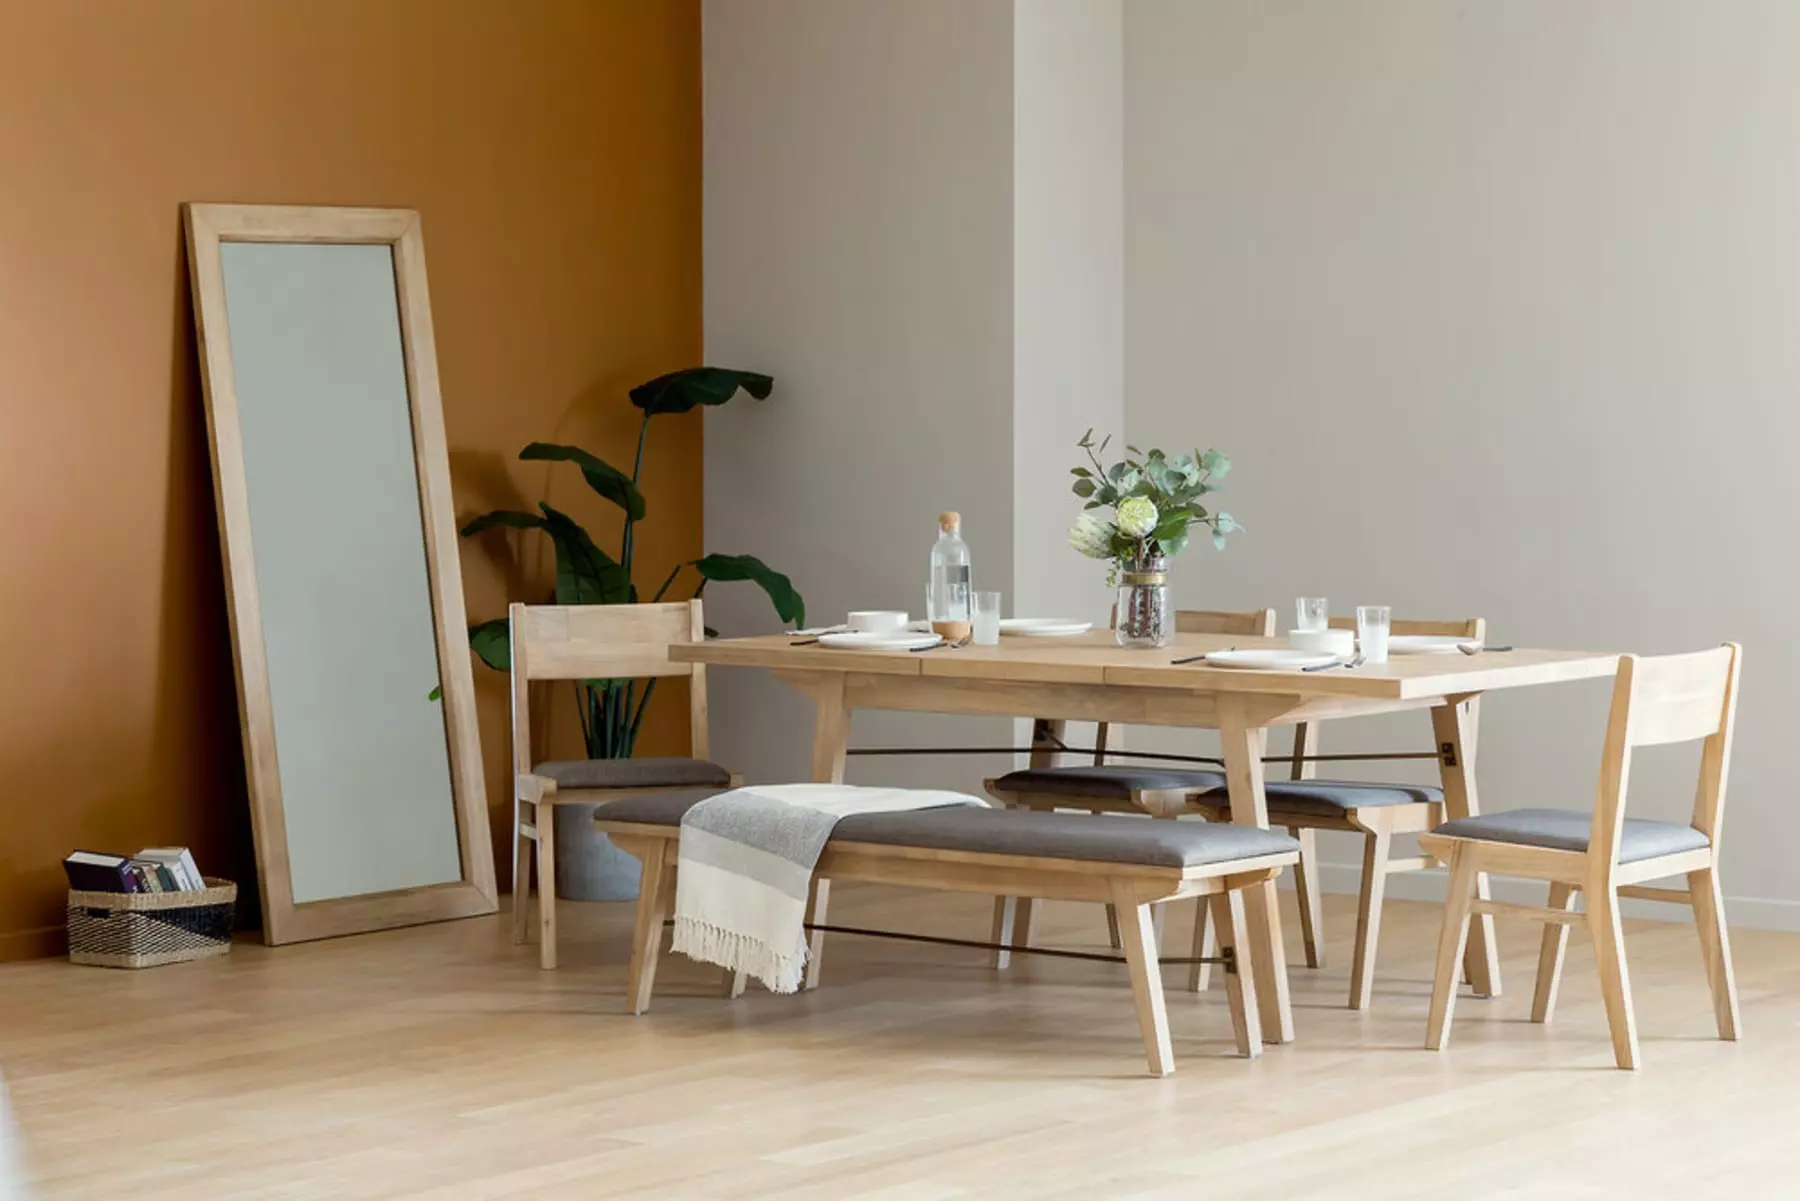 A mirror with a wooden frame is directly facing a matching dining table set.